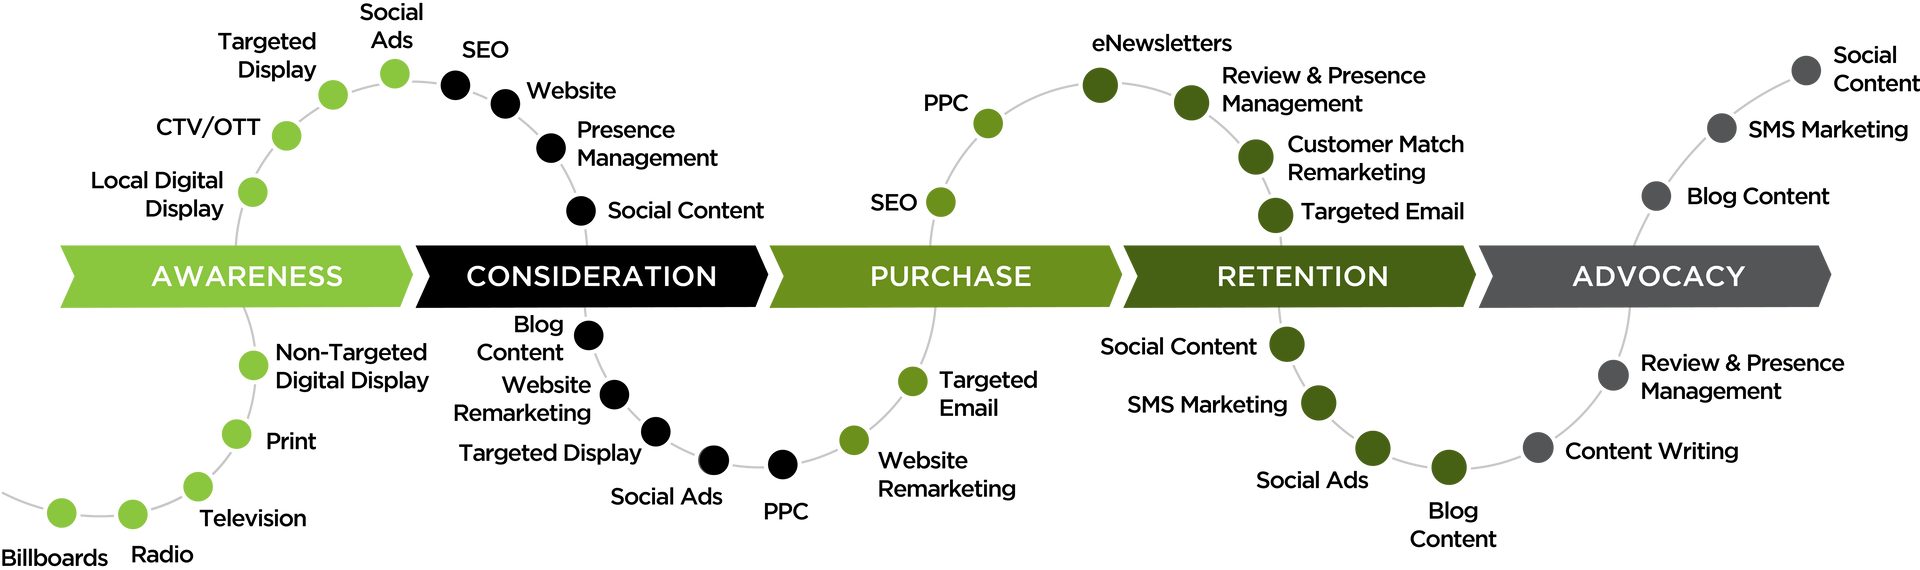 a diagram showing the stages of a omni-channel digital marketing .